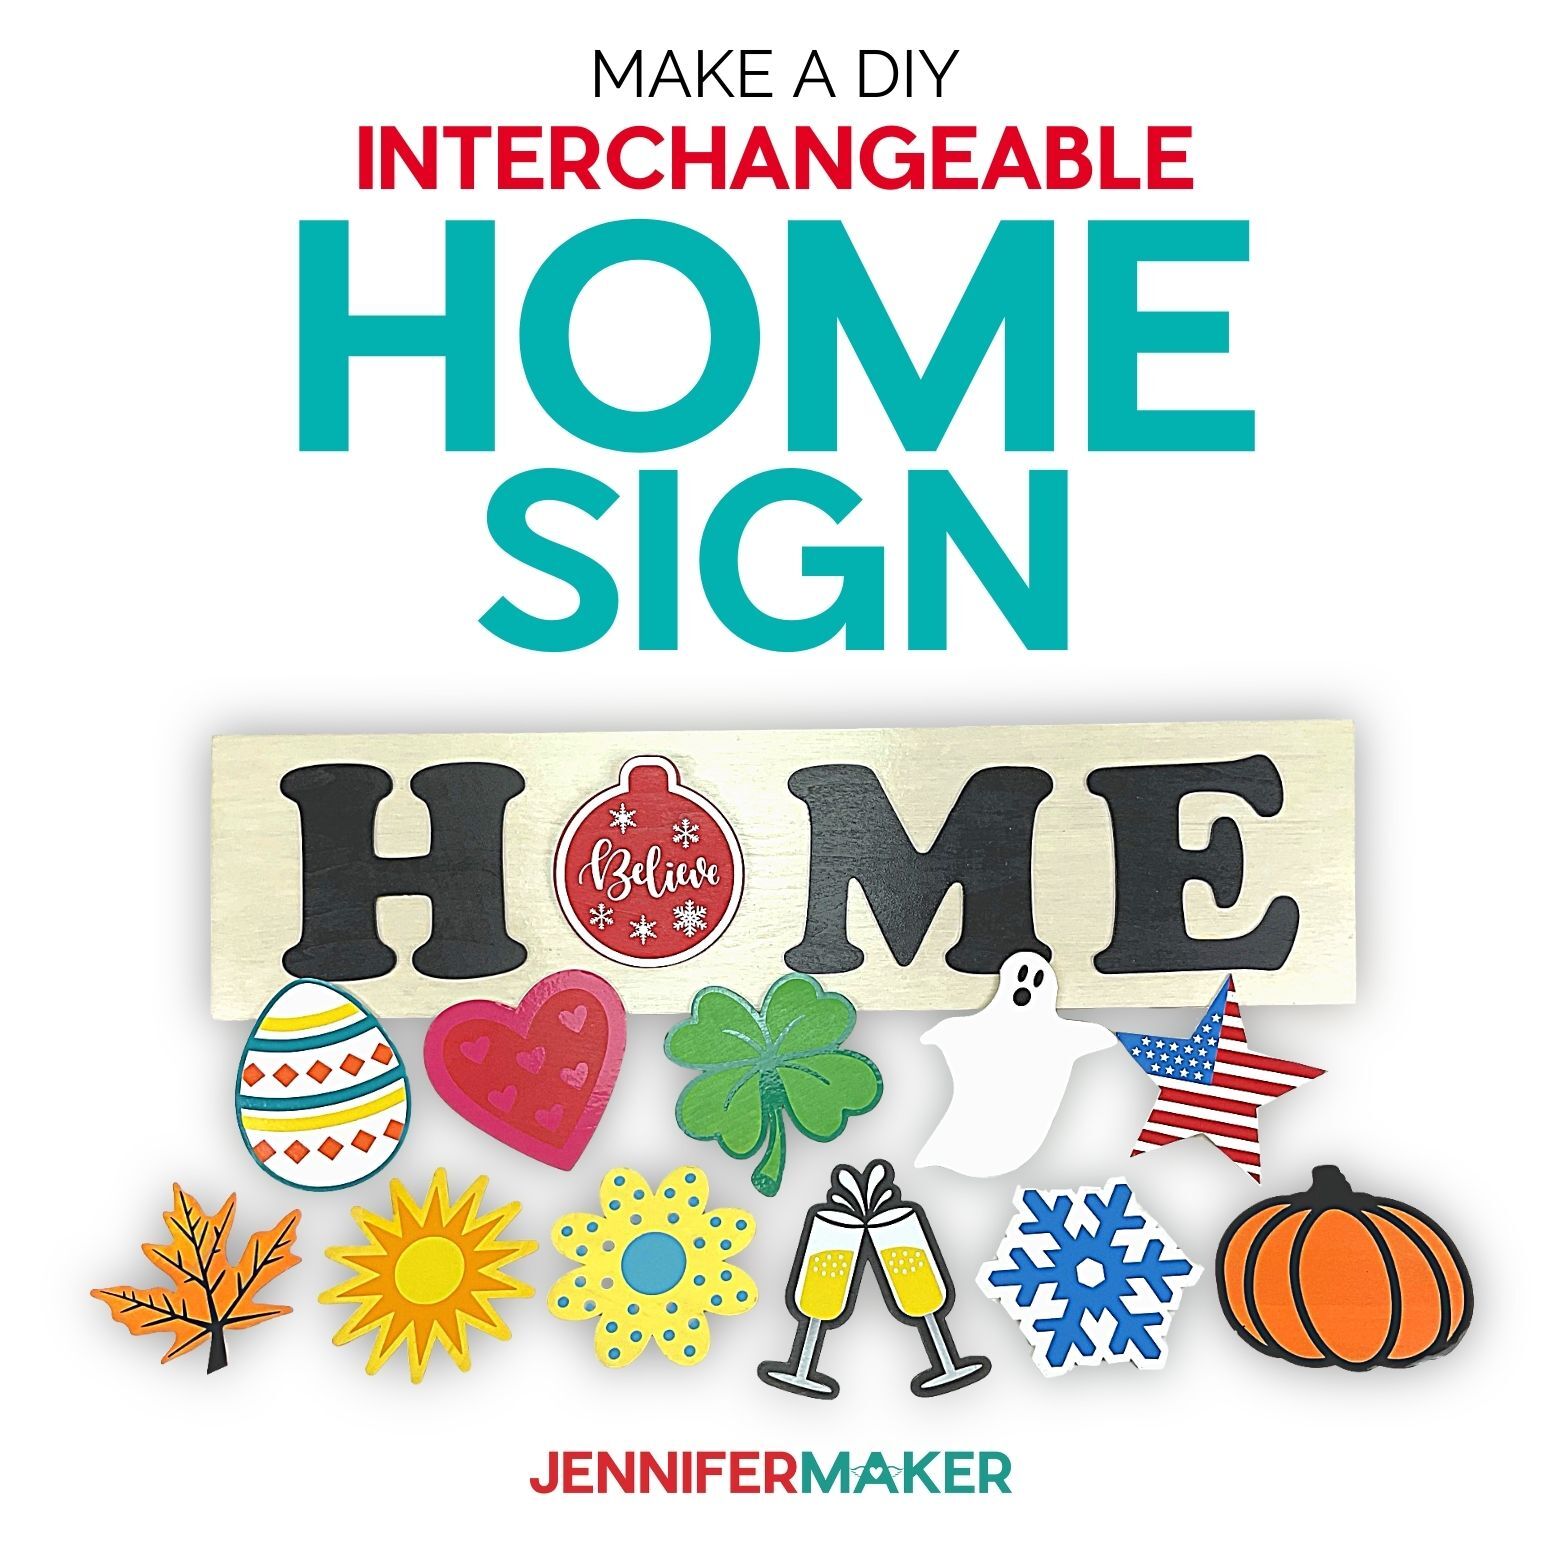 DIY Interchangeable Home Signs